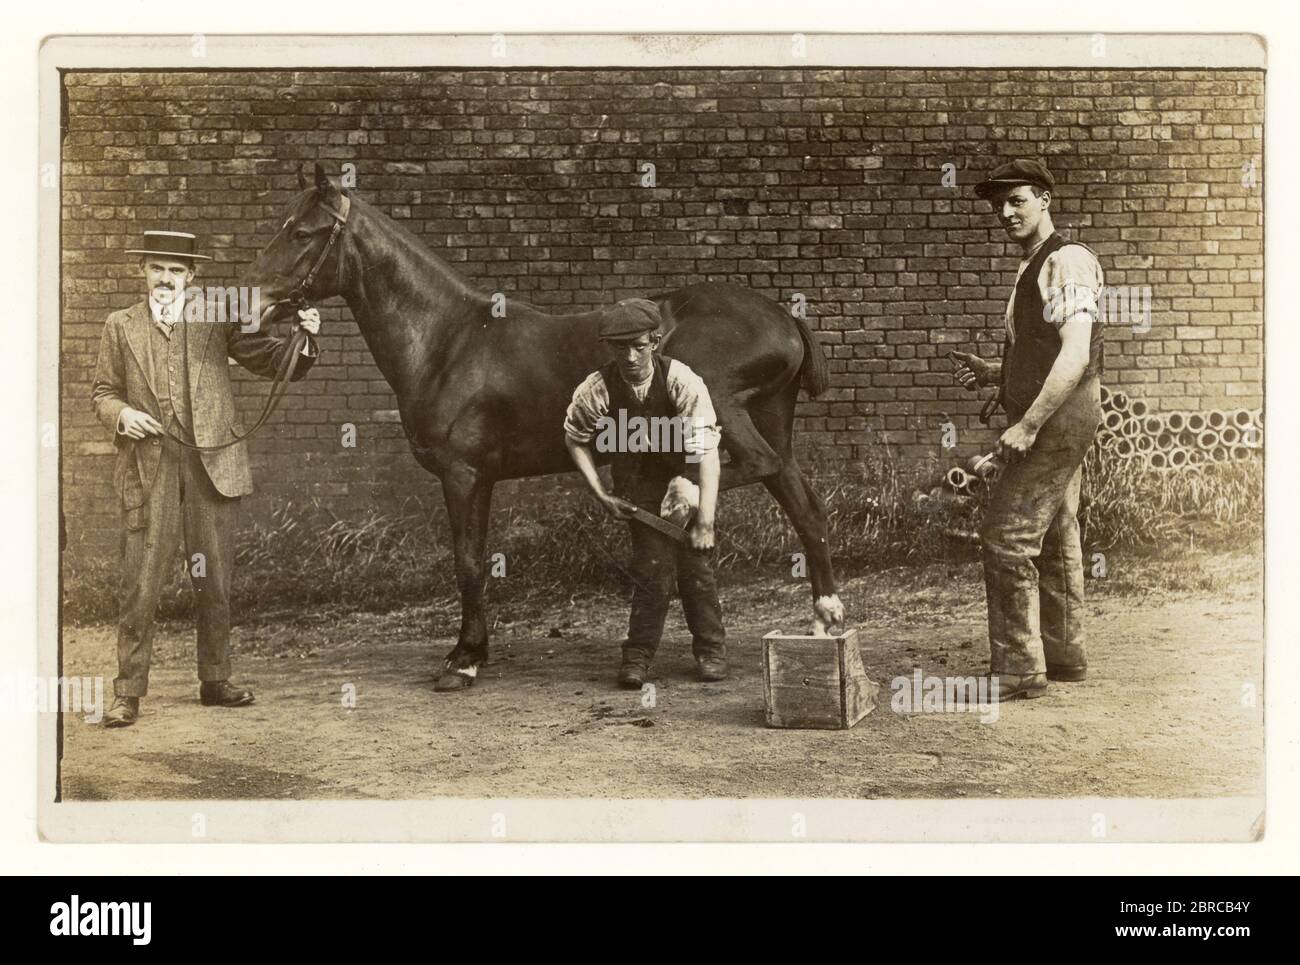 Early 1900's Edwardian era postcard of farrier or village blacksmith shoeing a horse with owner, circa 1910, U.K. Stock Photo